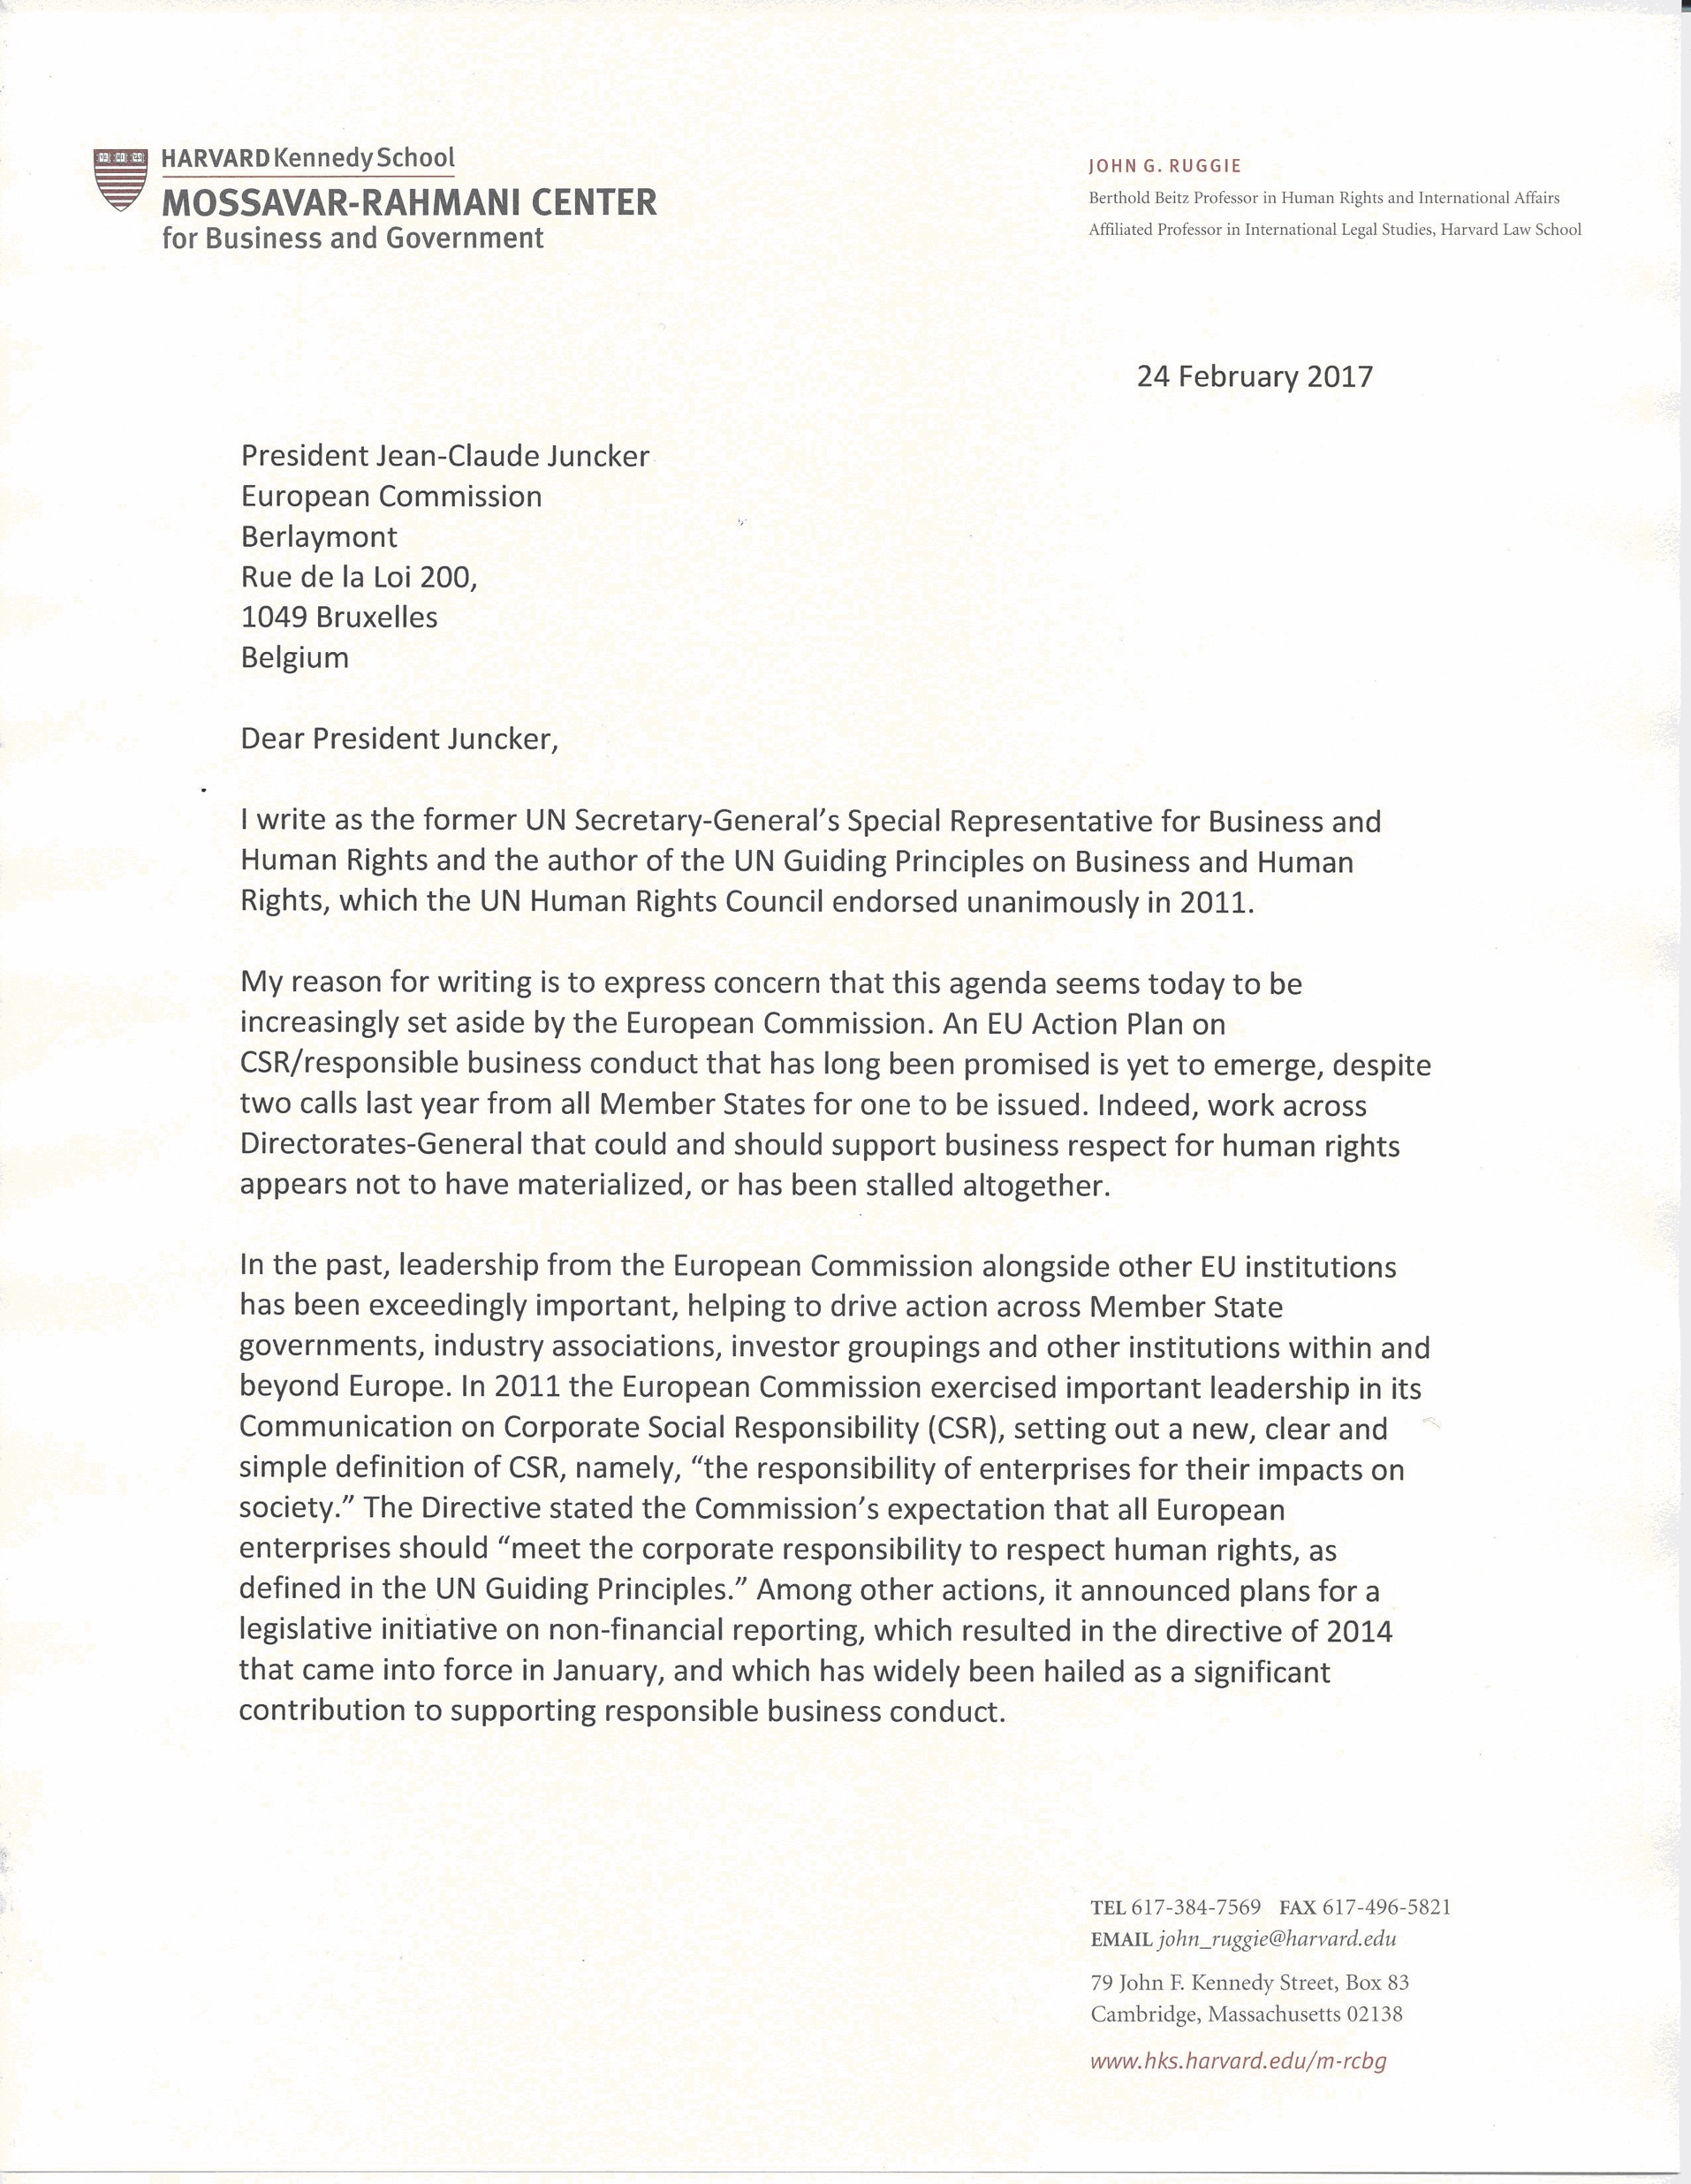 John Ruggie Letter to European Commission President Jean-Claude